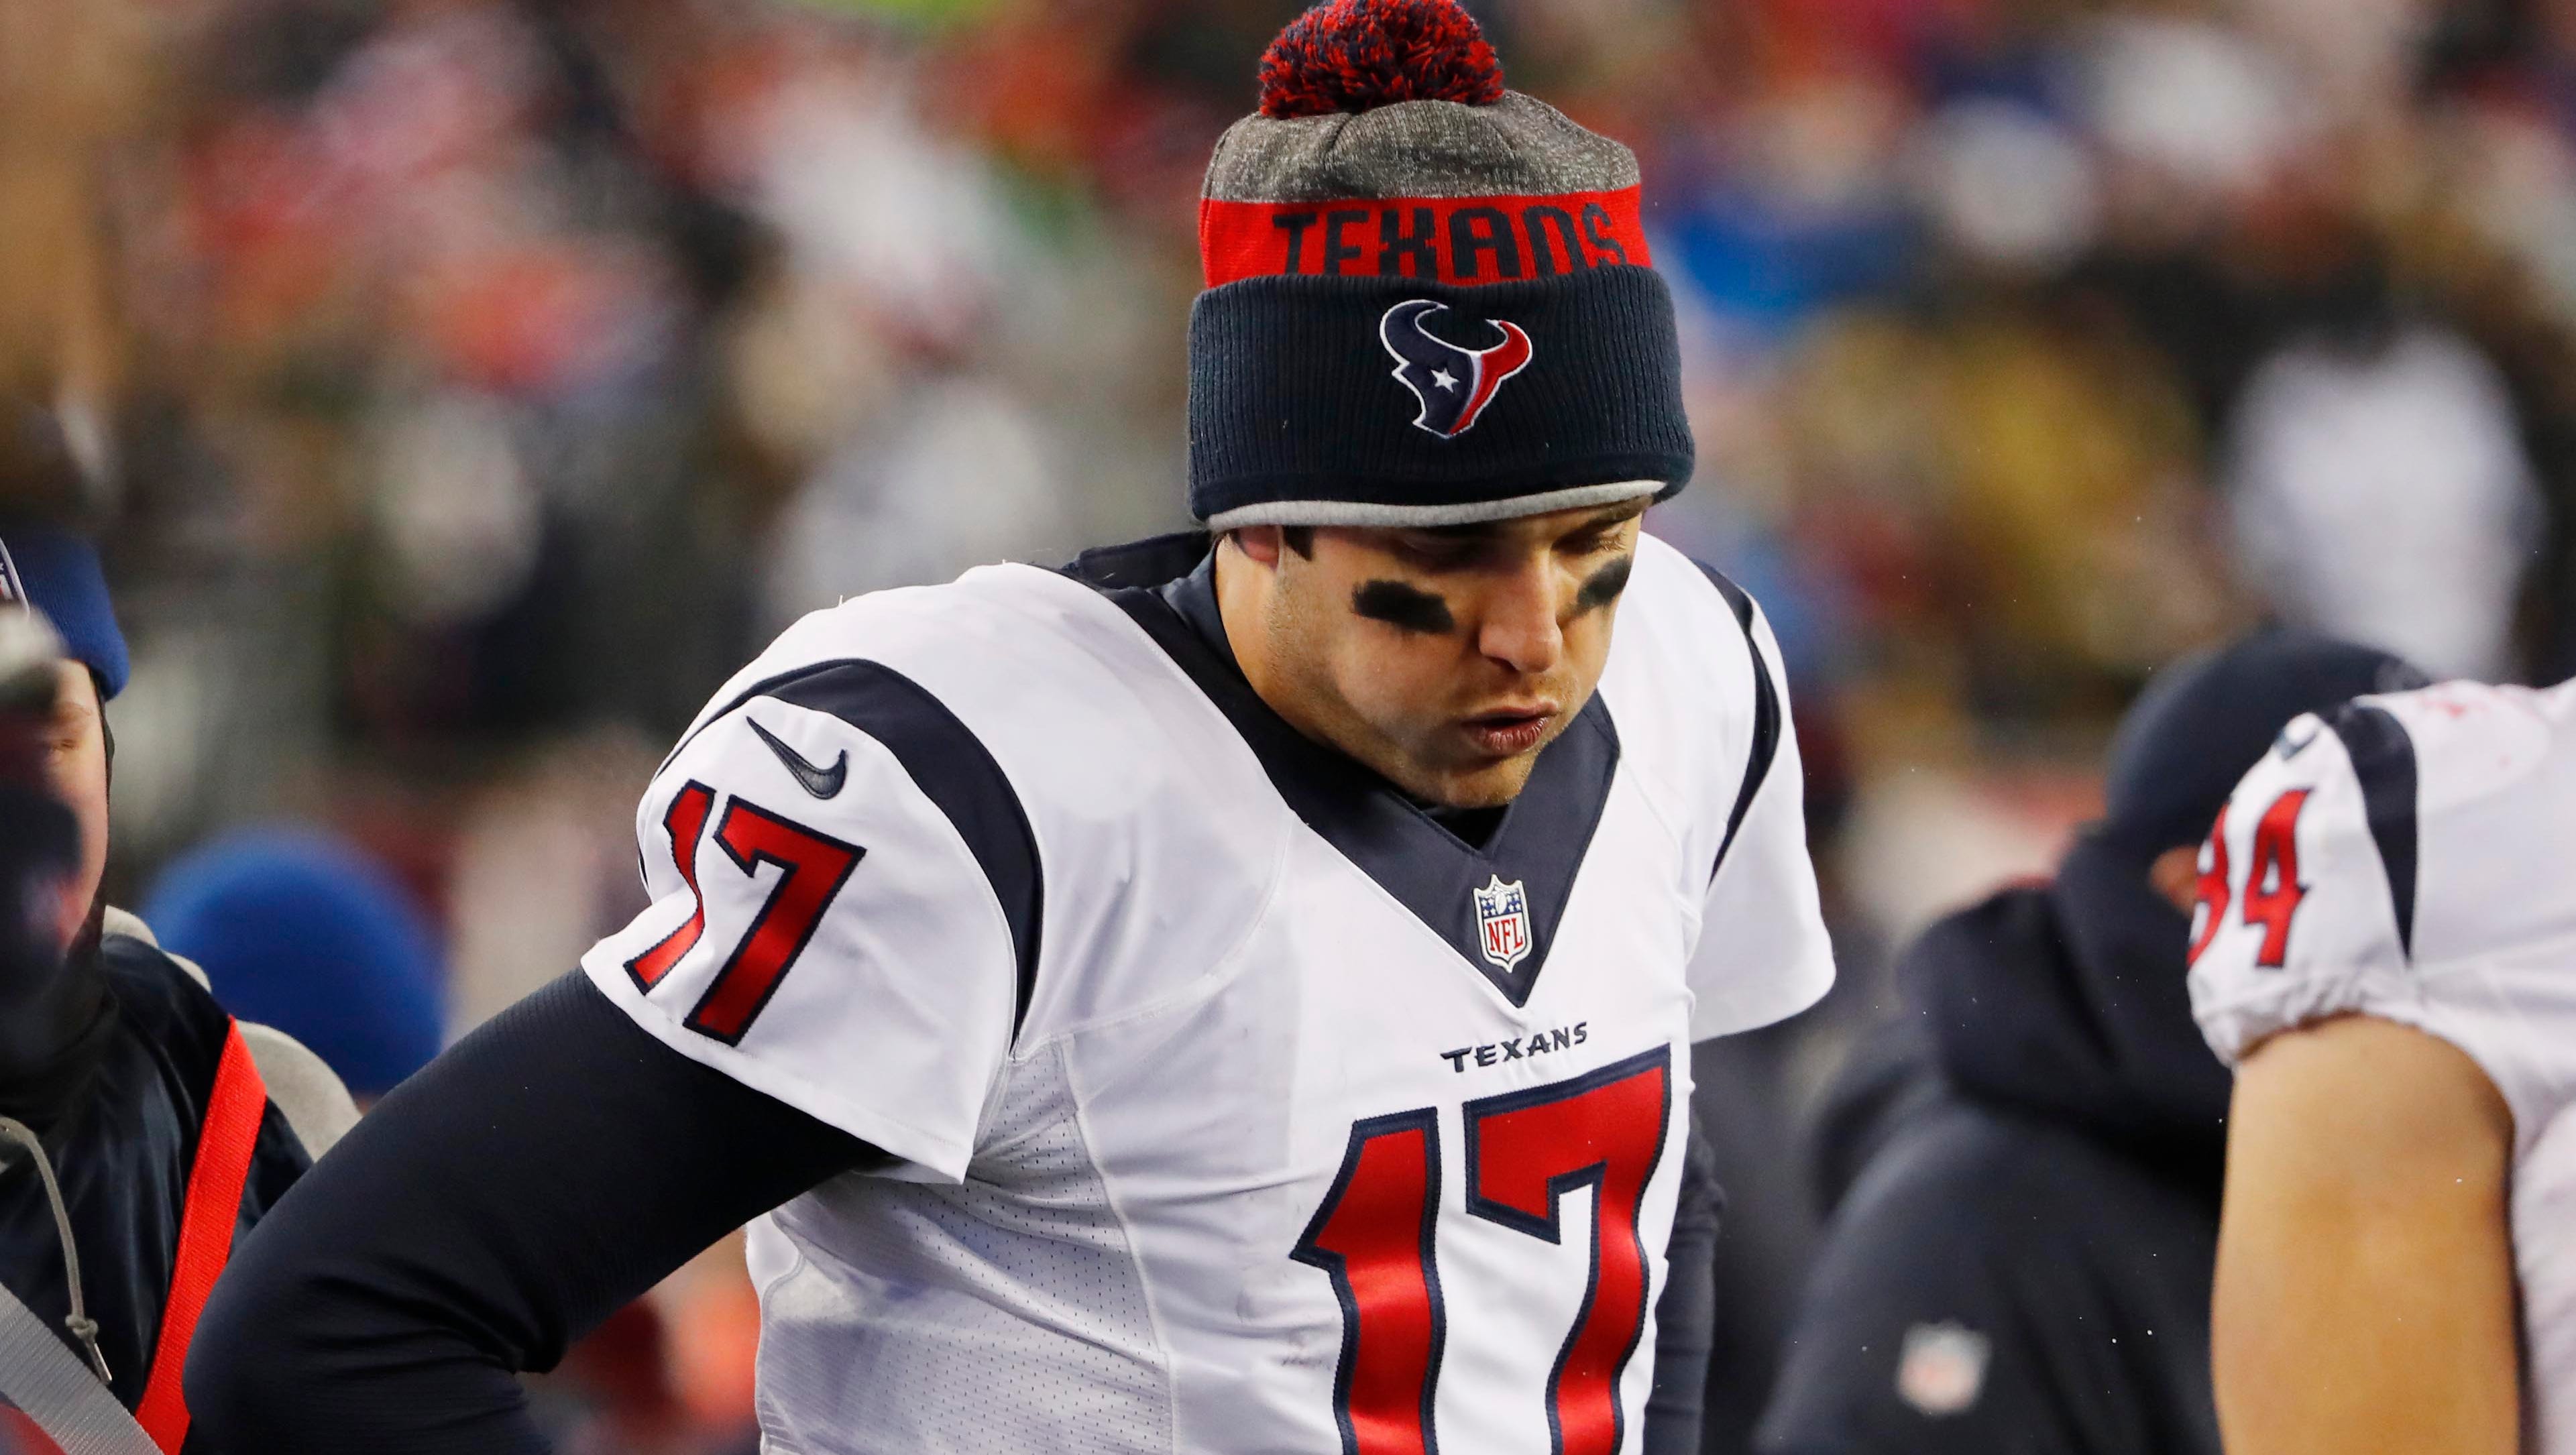 Texans' Brock Osweiler unravels as frustrating season comes to an end